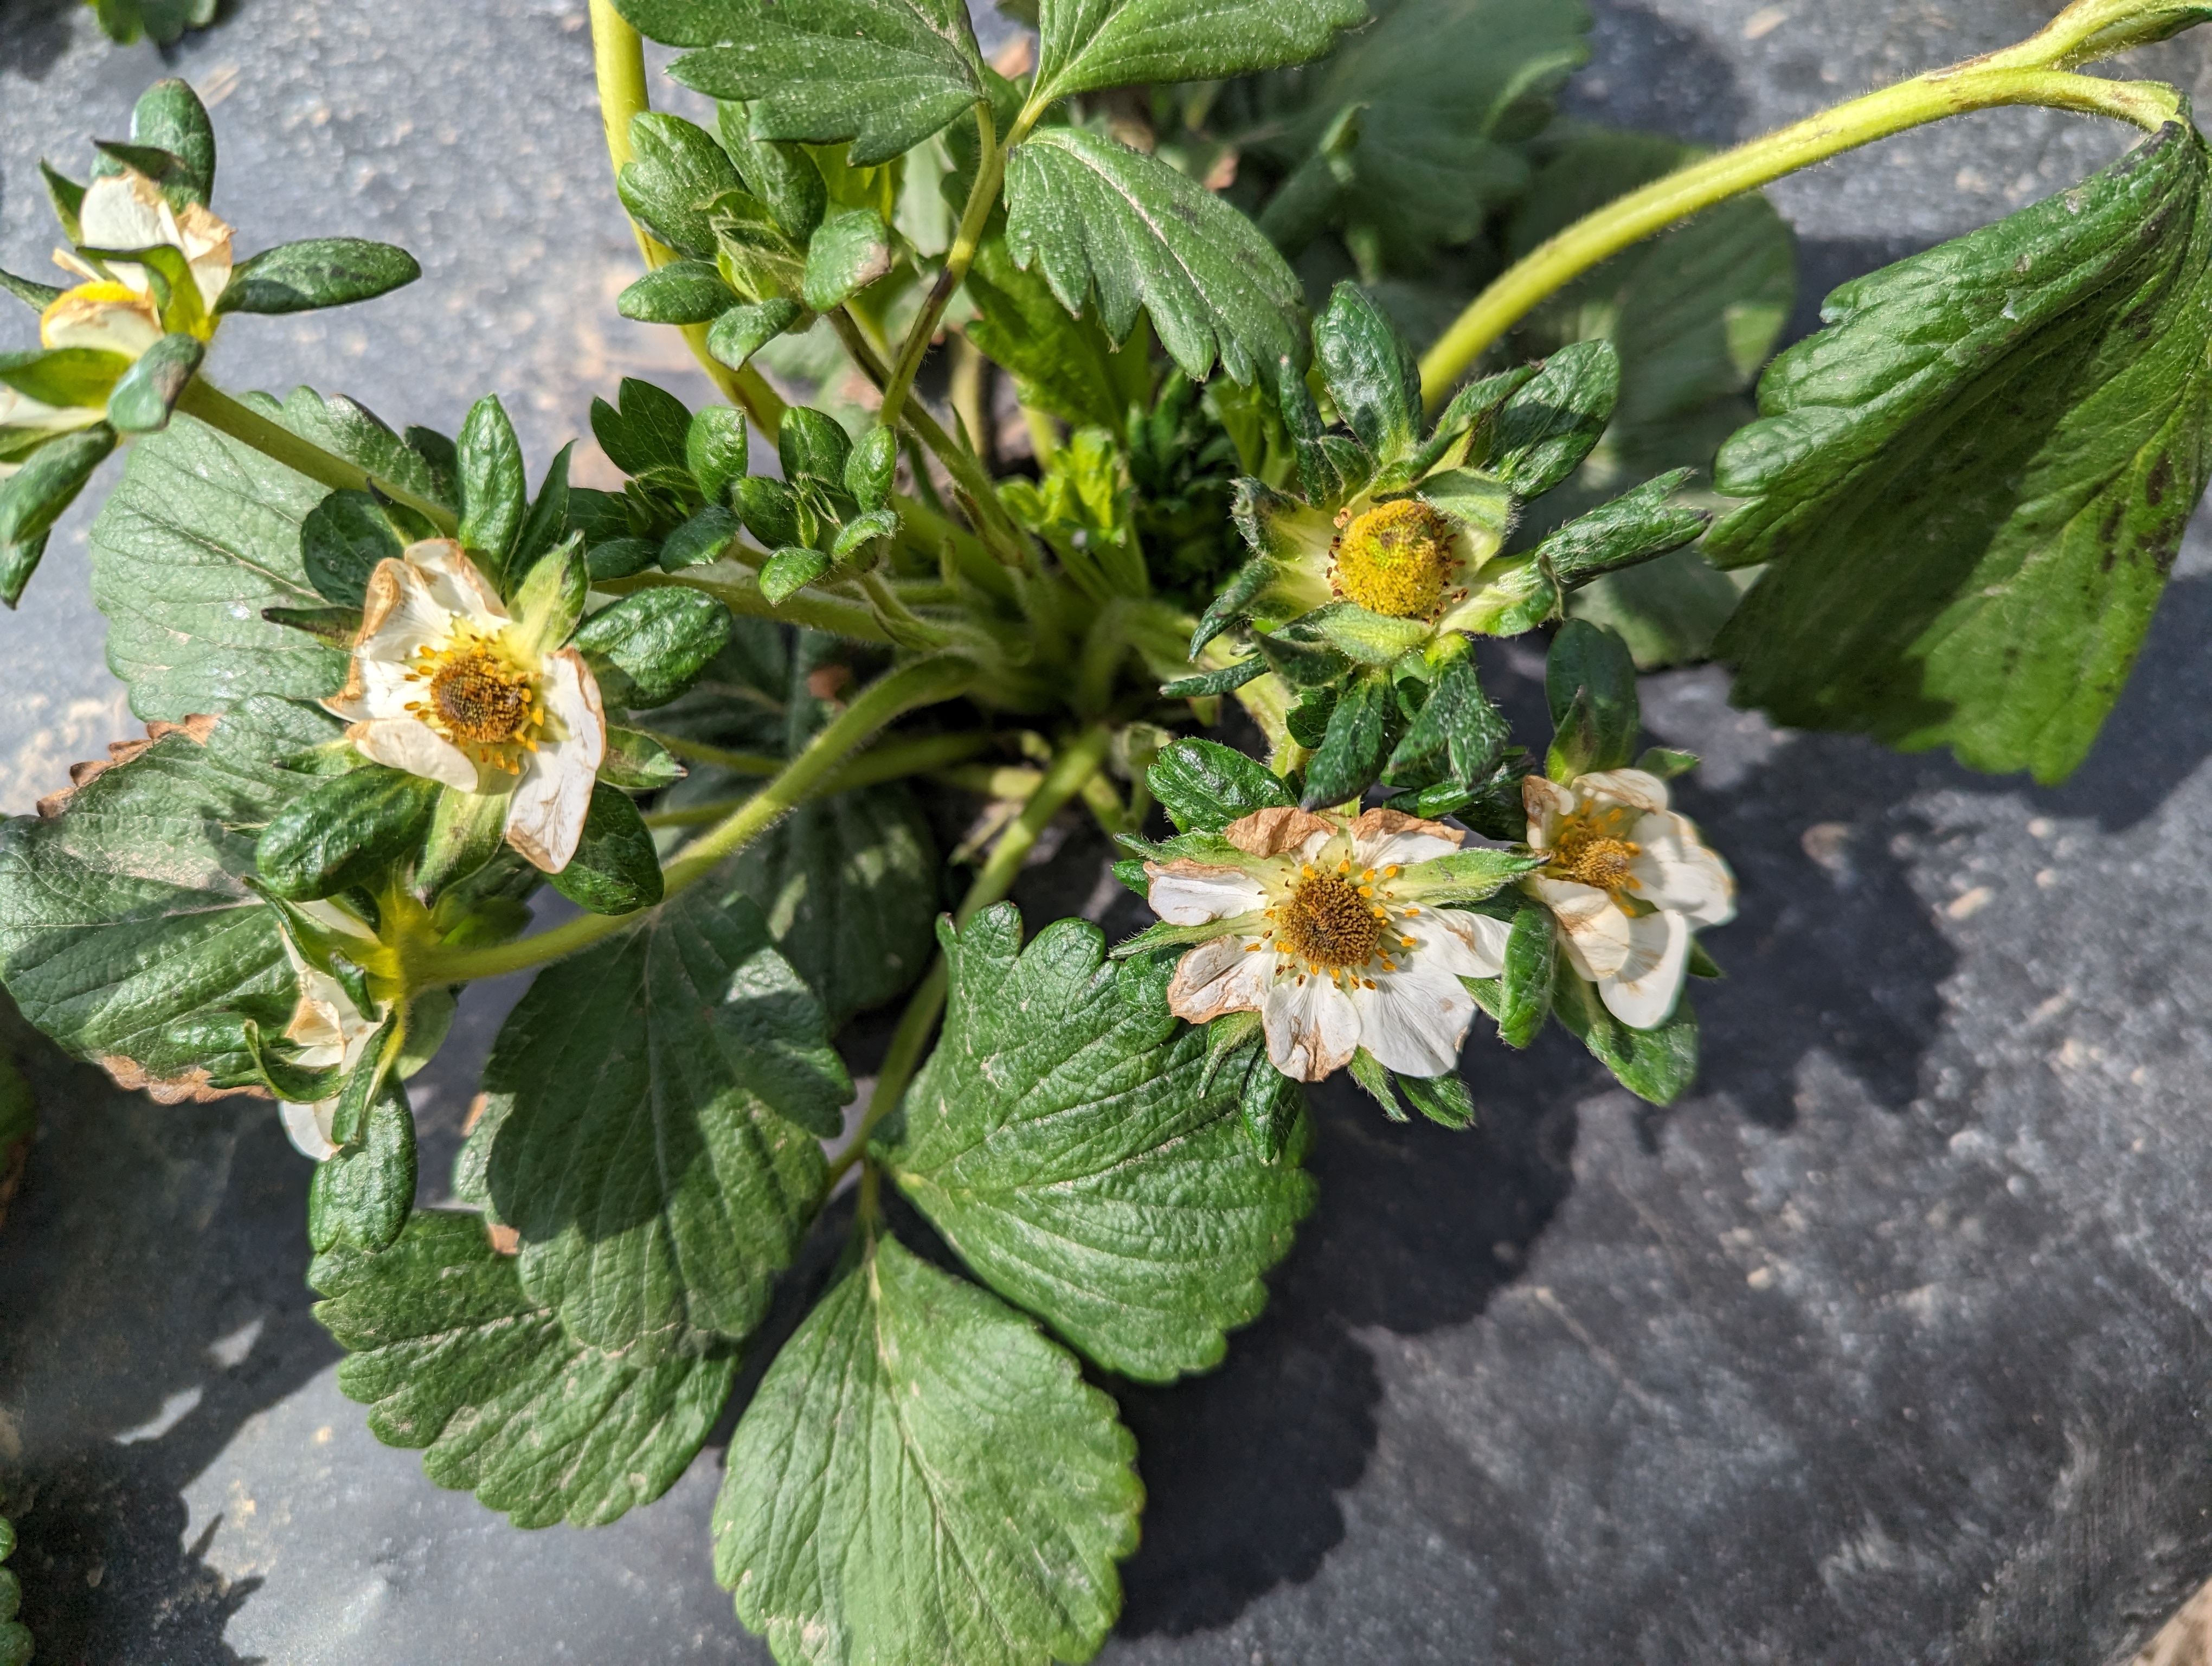 Brown and wilted strawberry plants from freeze damage.